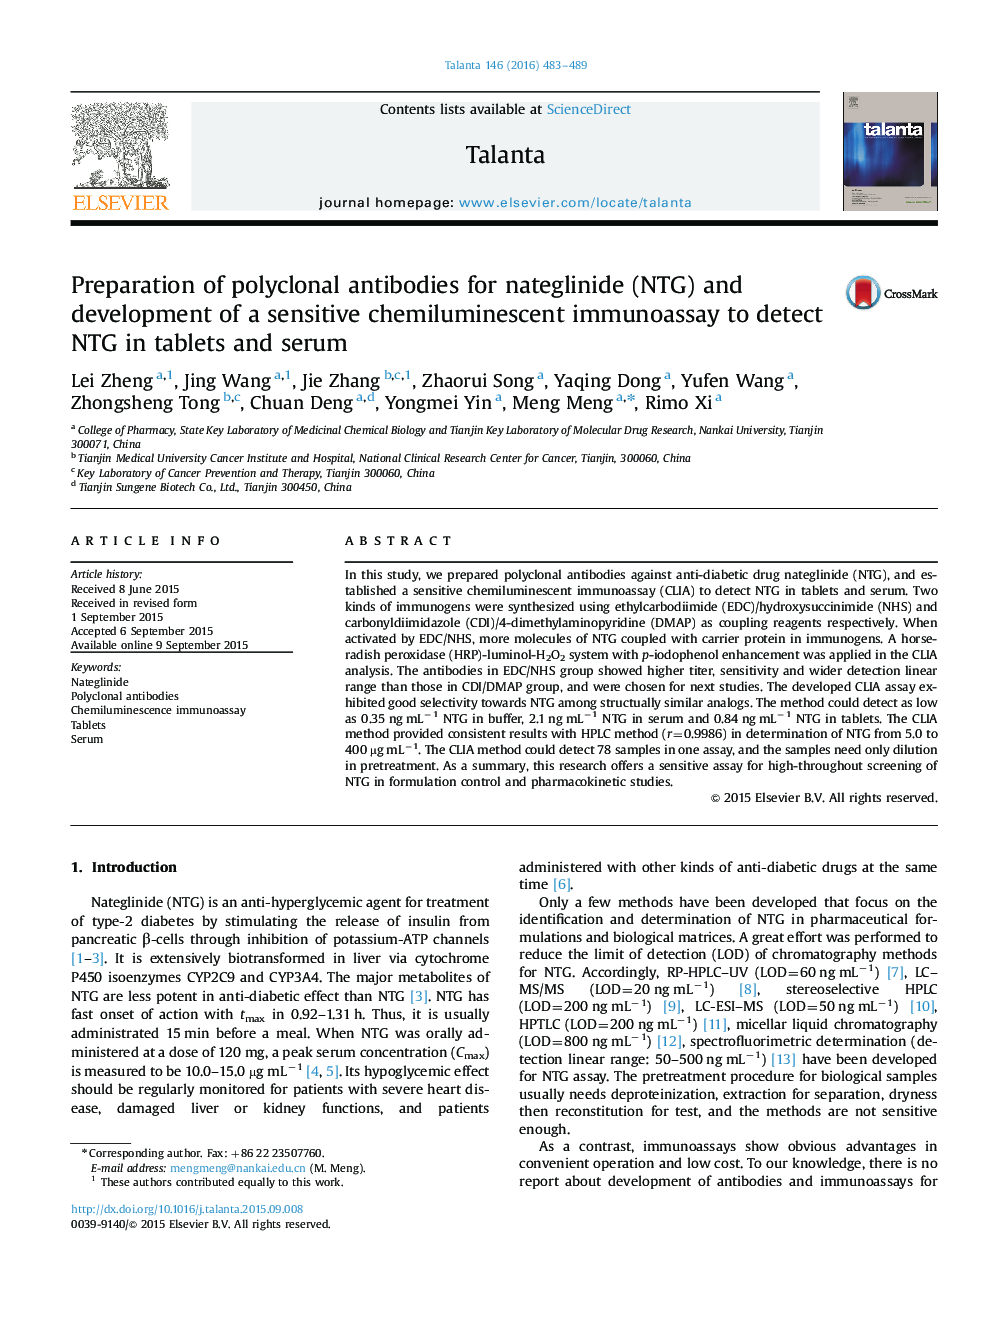 Preparation of polyclonal antibodies for nateglinide (NTG) and development of a sensitive chemiluminescent immunoassay to detect NTG in tablets and serum